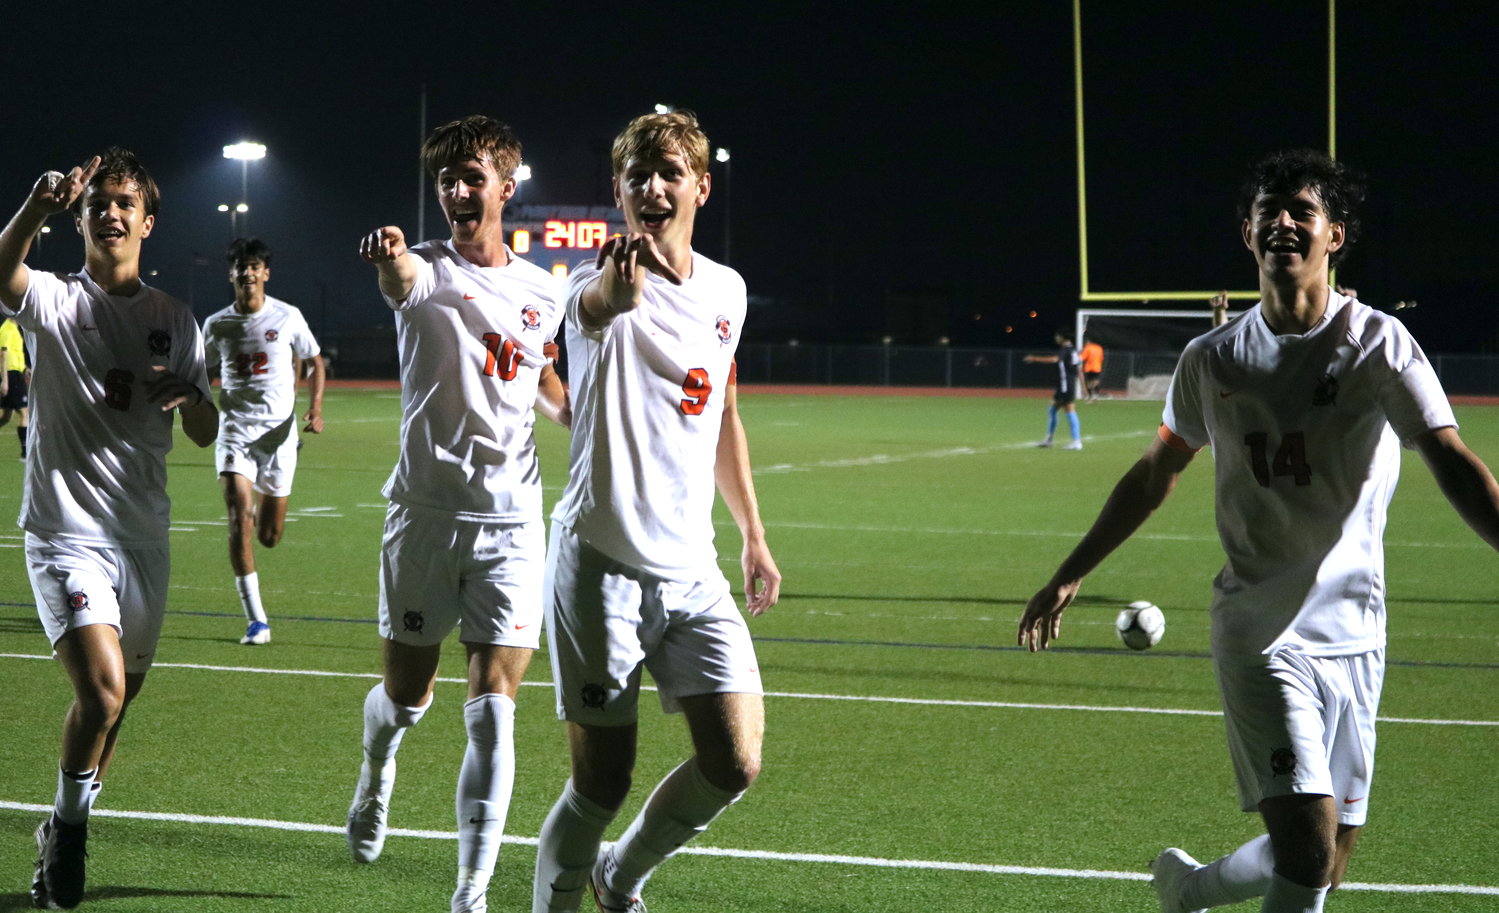 Seven Lakes players celebrate during Tuesday's District 19-6A game between Seven Lakes and Paetow at the Paetow soccer field.